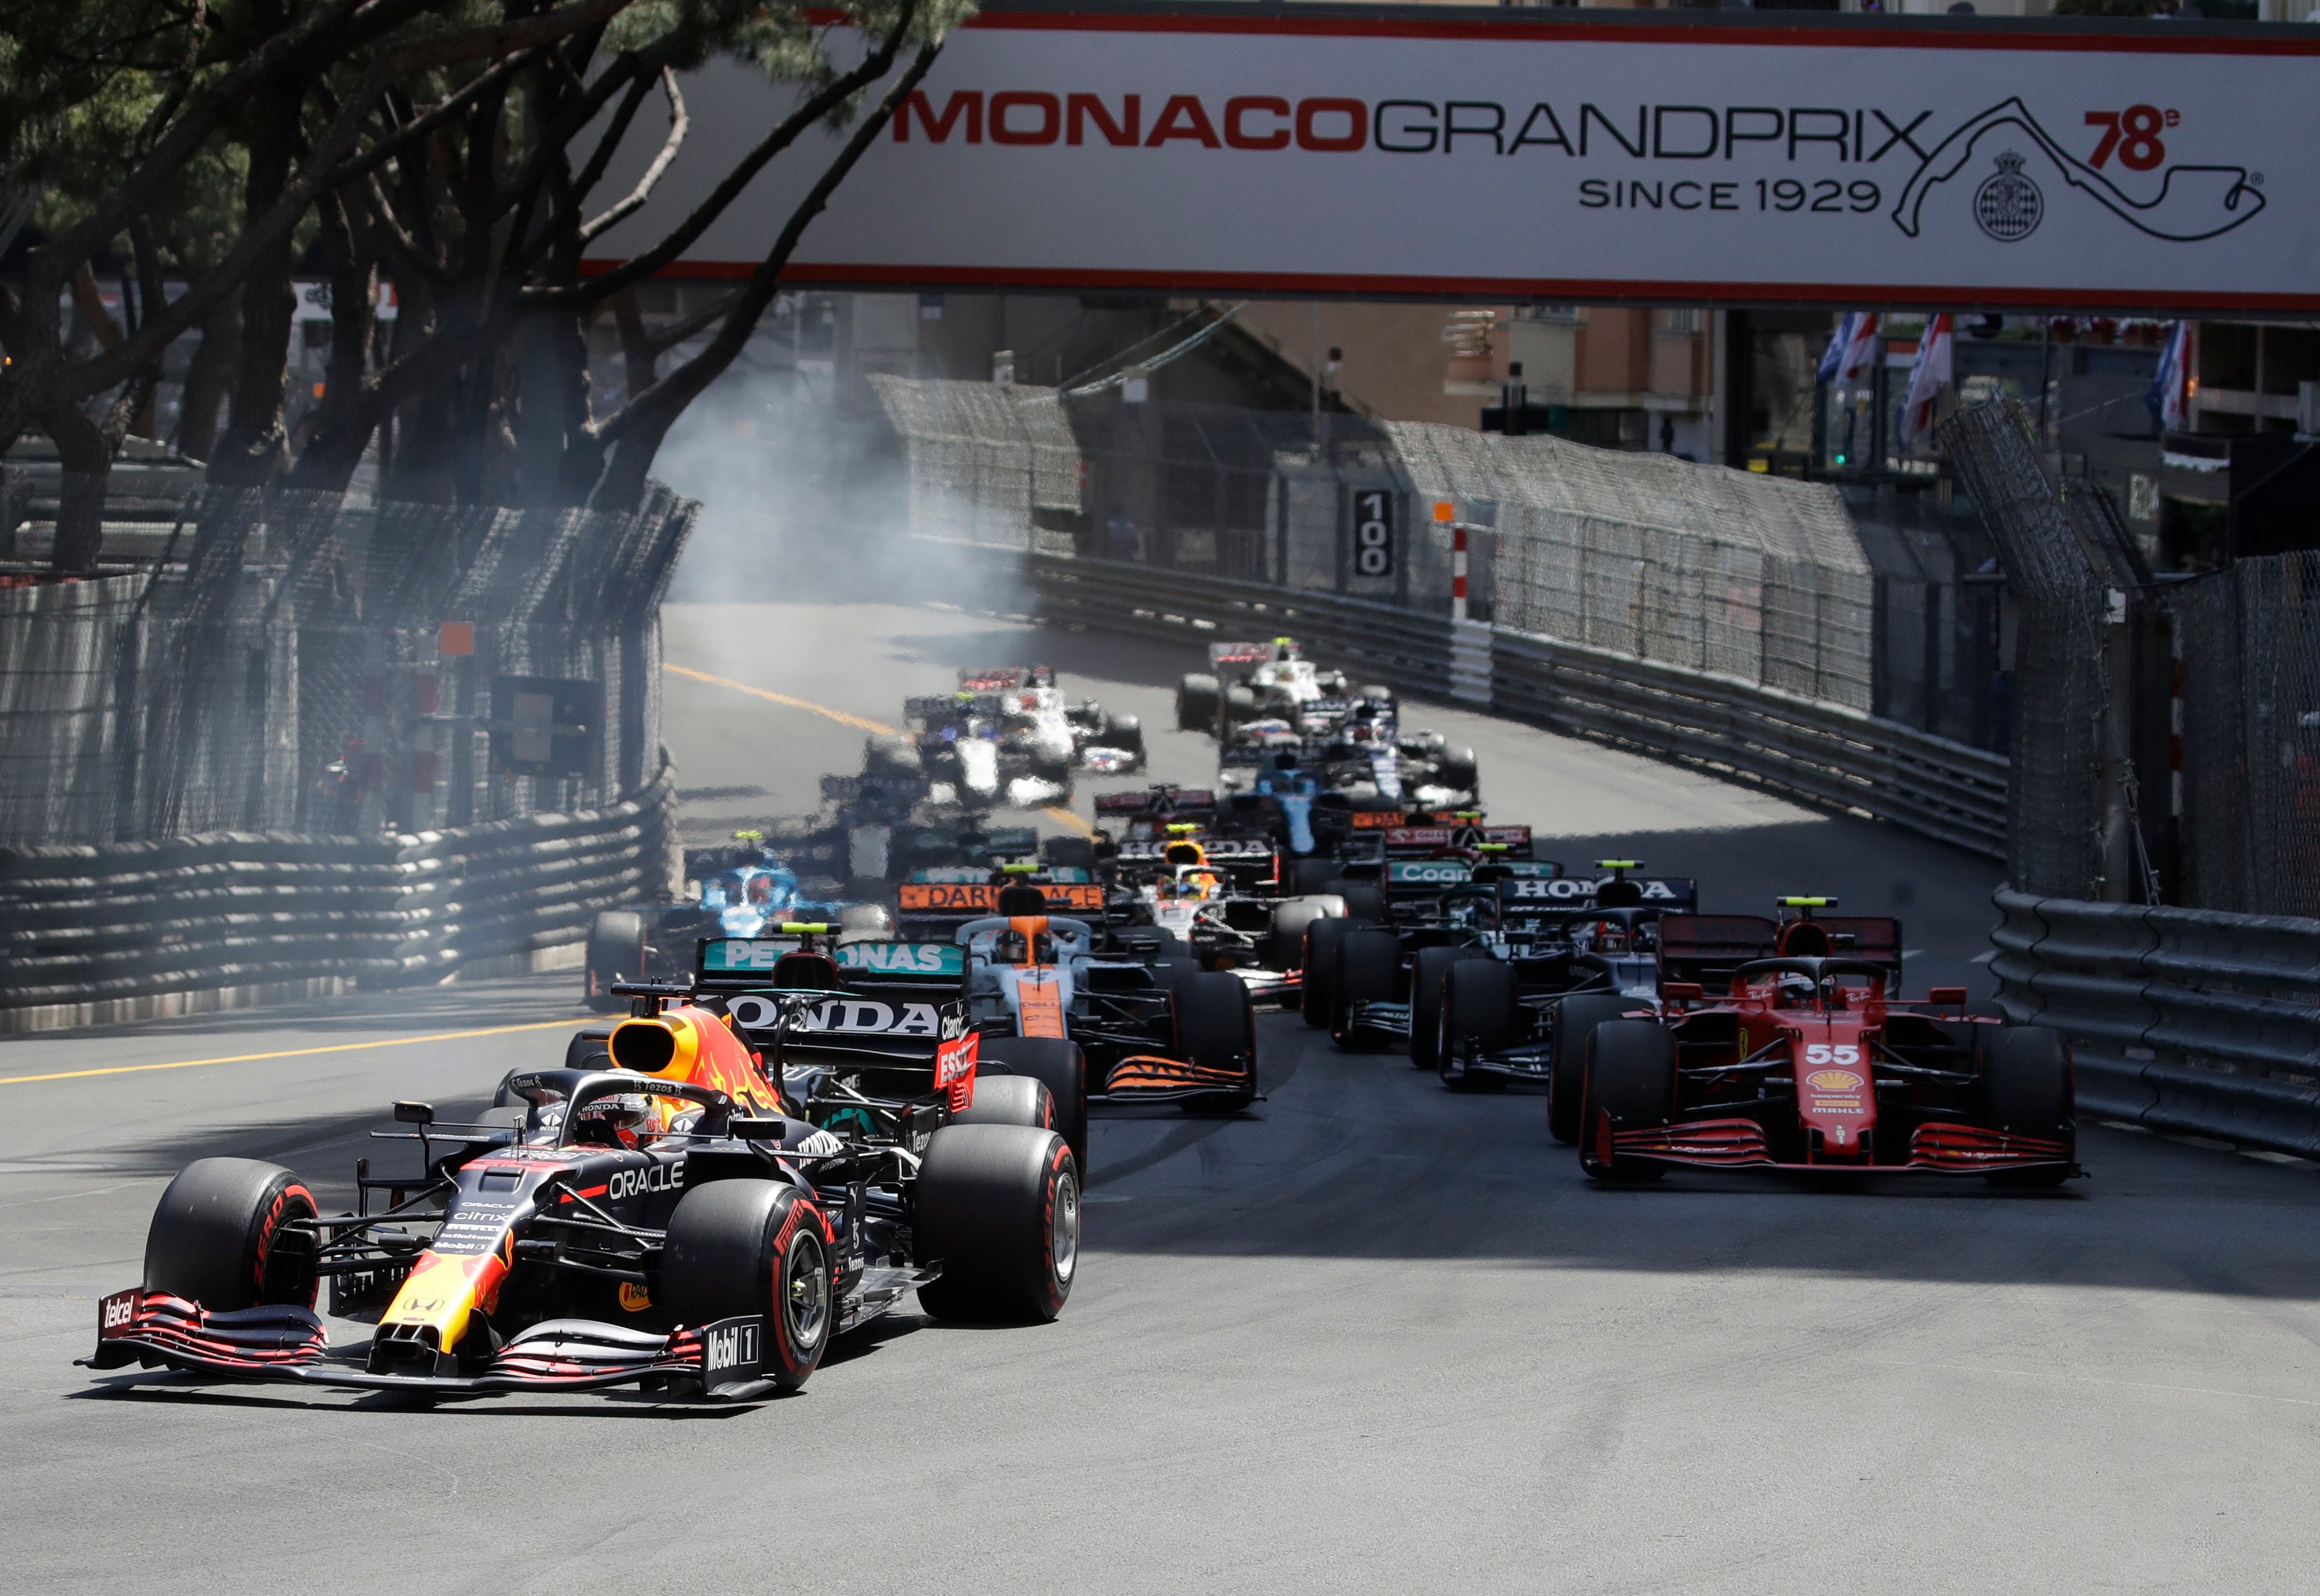 Max Verstappen held on to his lead throughout the race